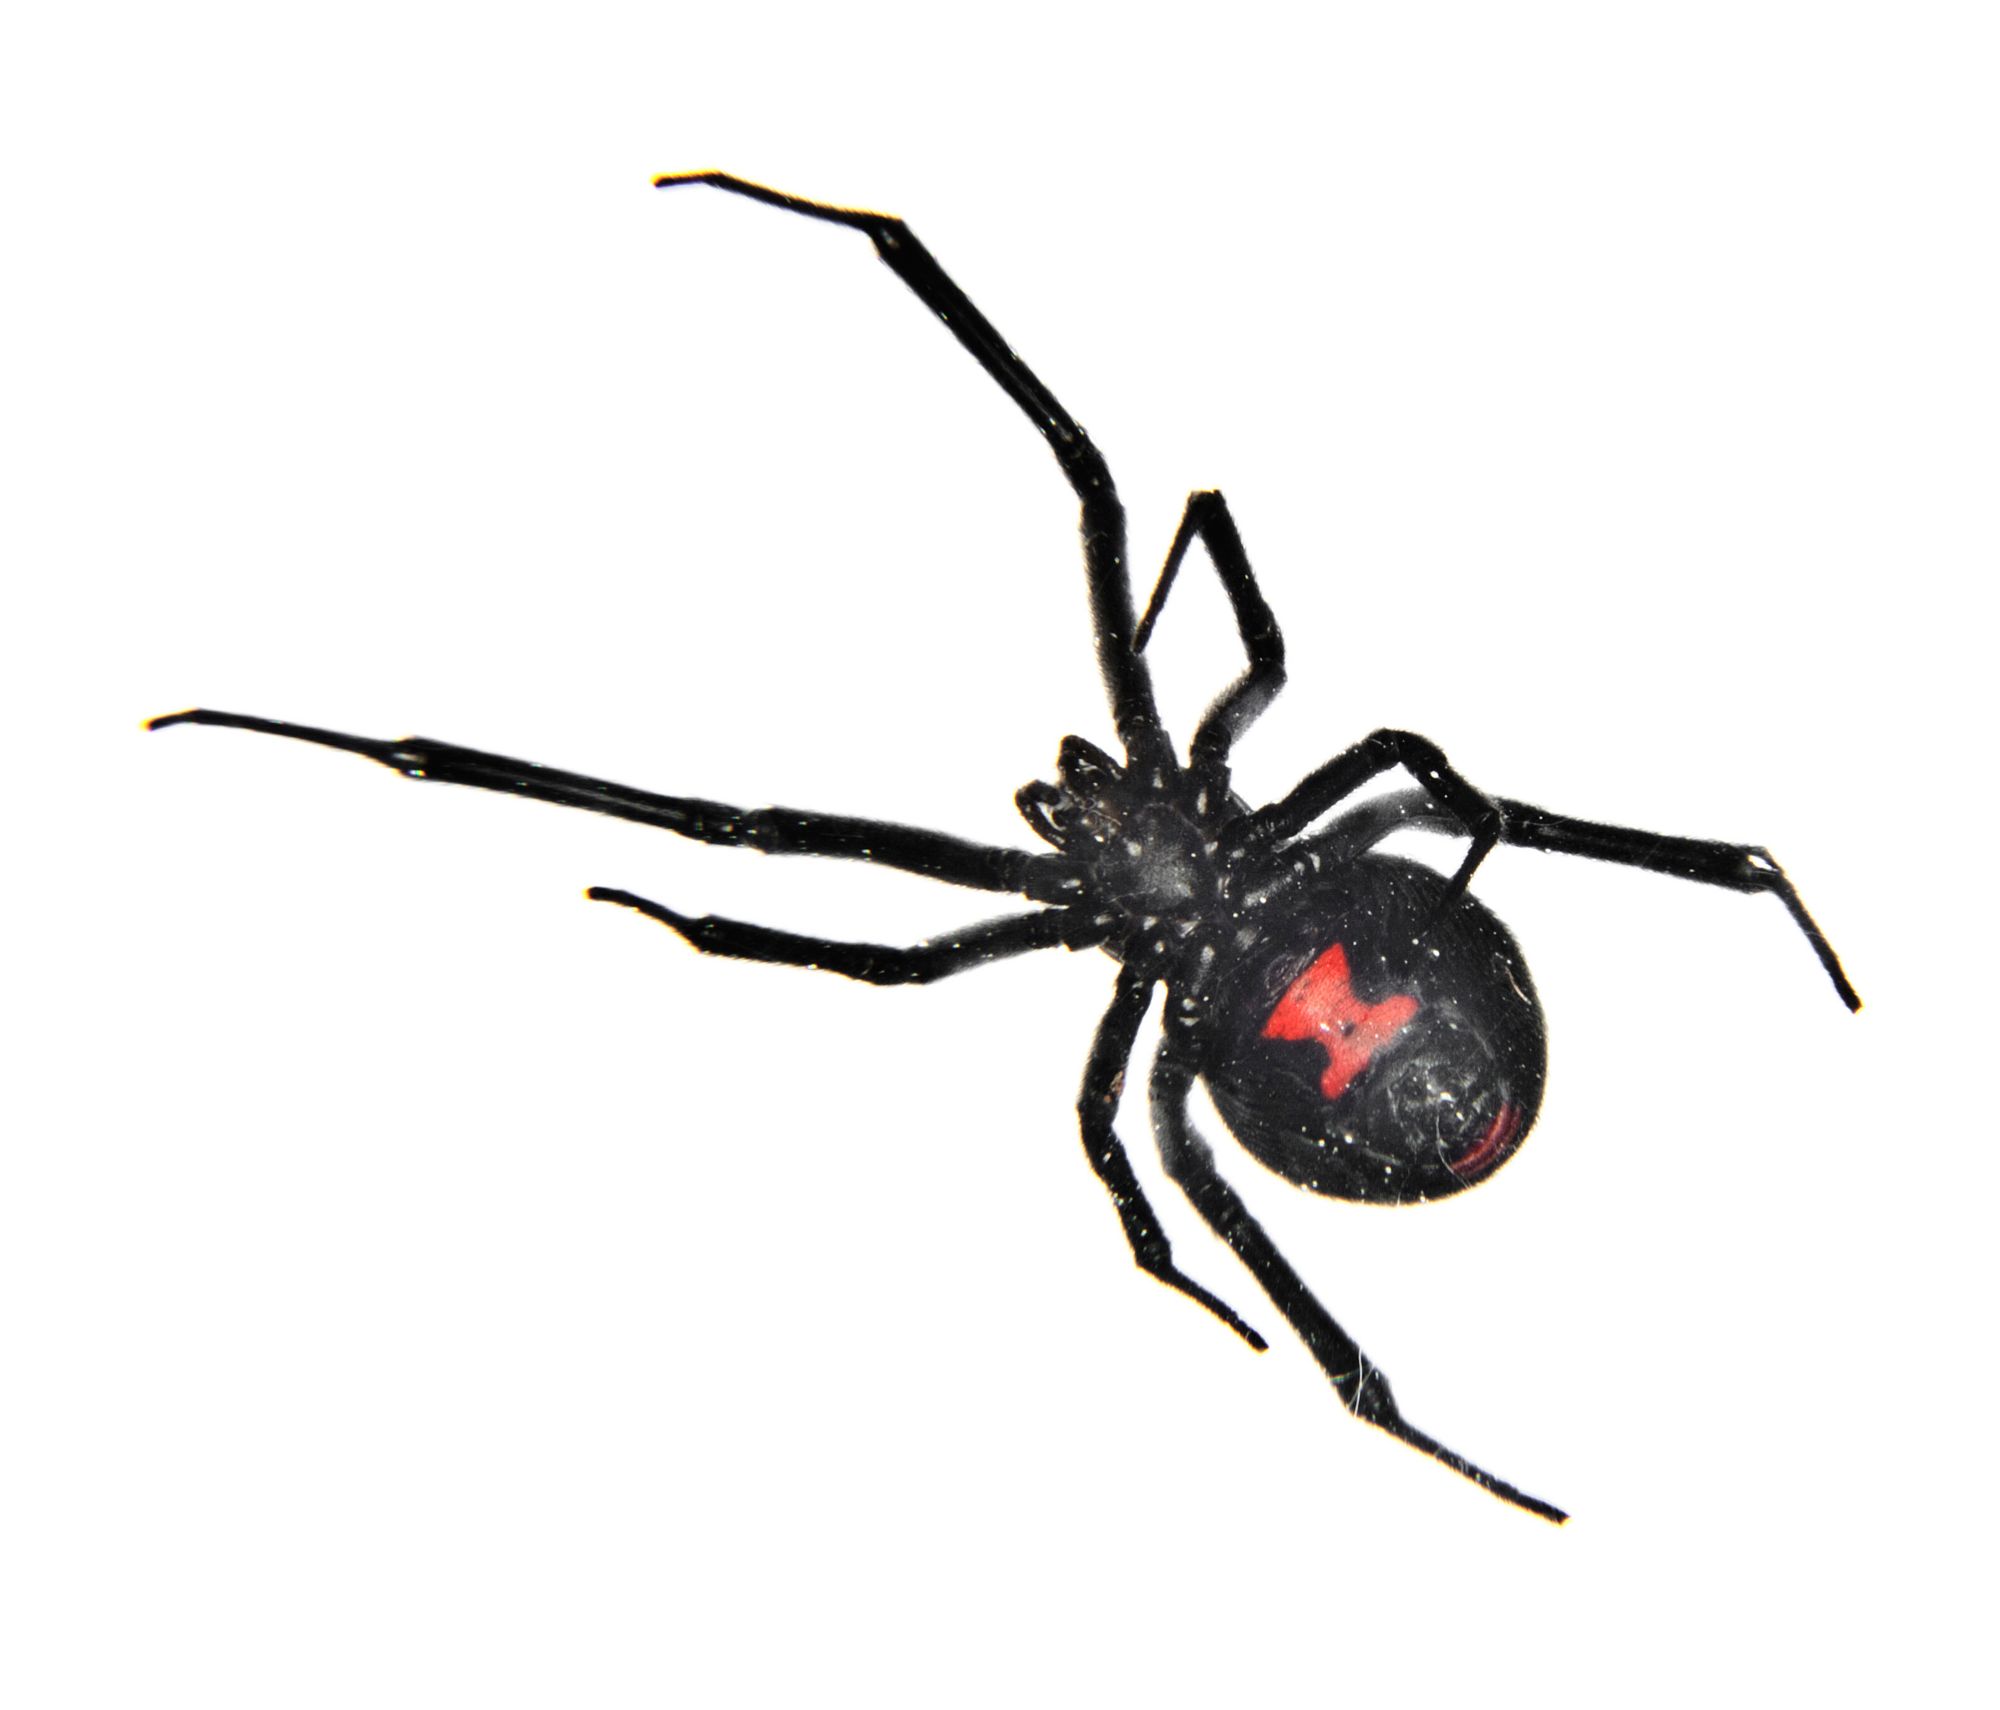 ter-insects-black-widow-spider-article-2